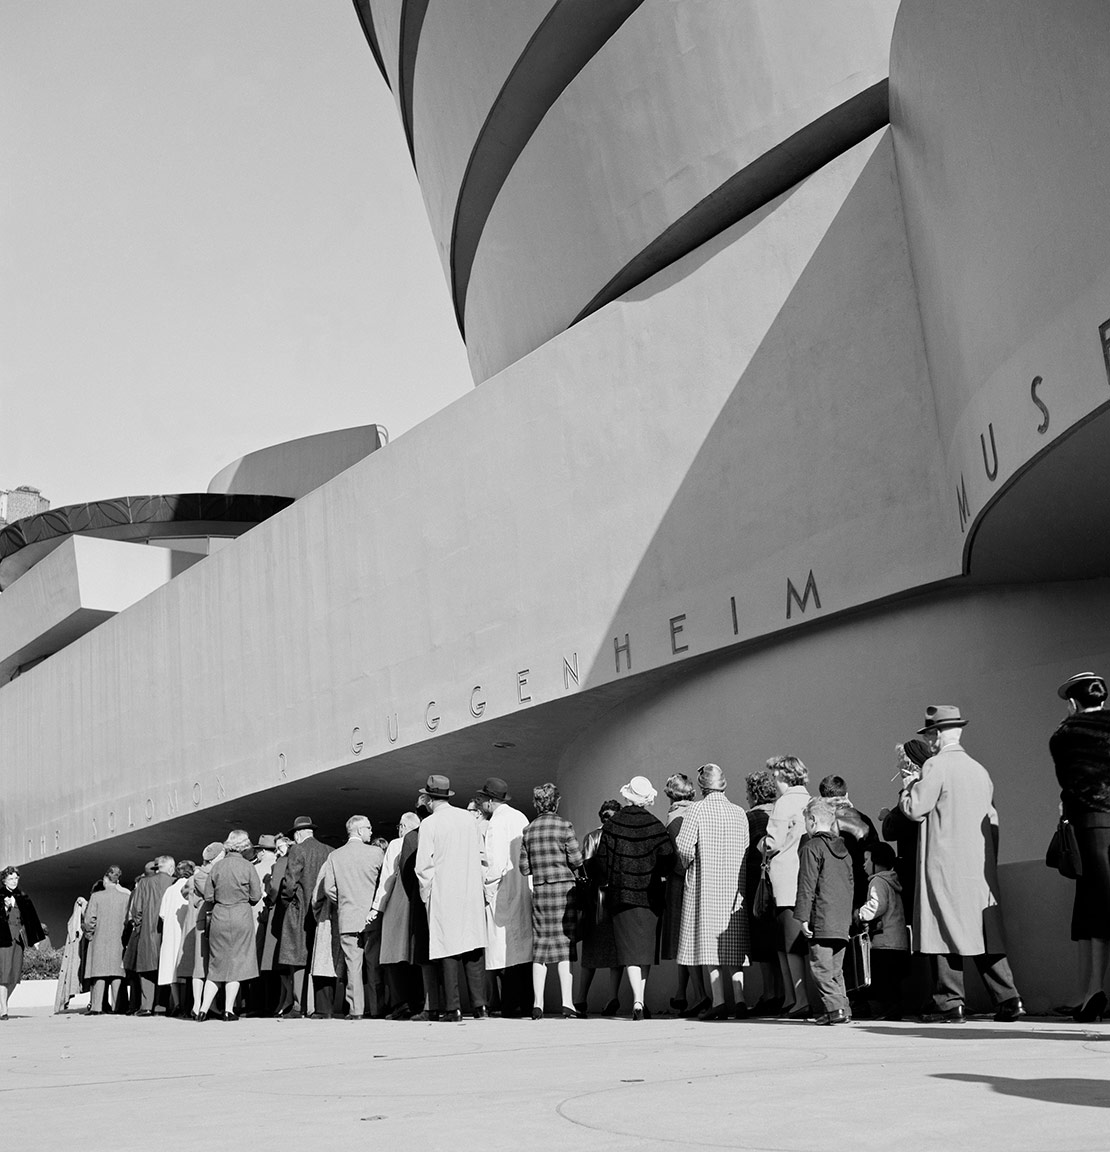 New York's @Guggenheim opened #OnThisDay in 1959. The iconic example of modernist architecture was designed by Frank Lloyd Wright as a hub for new art and ideas.